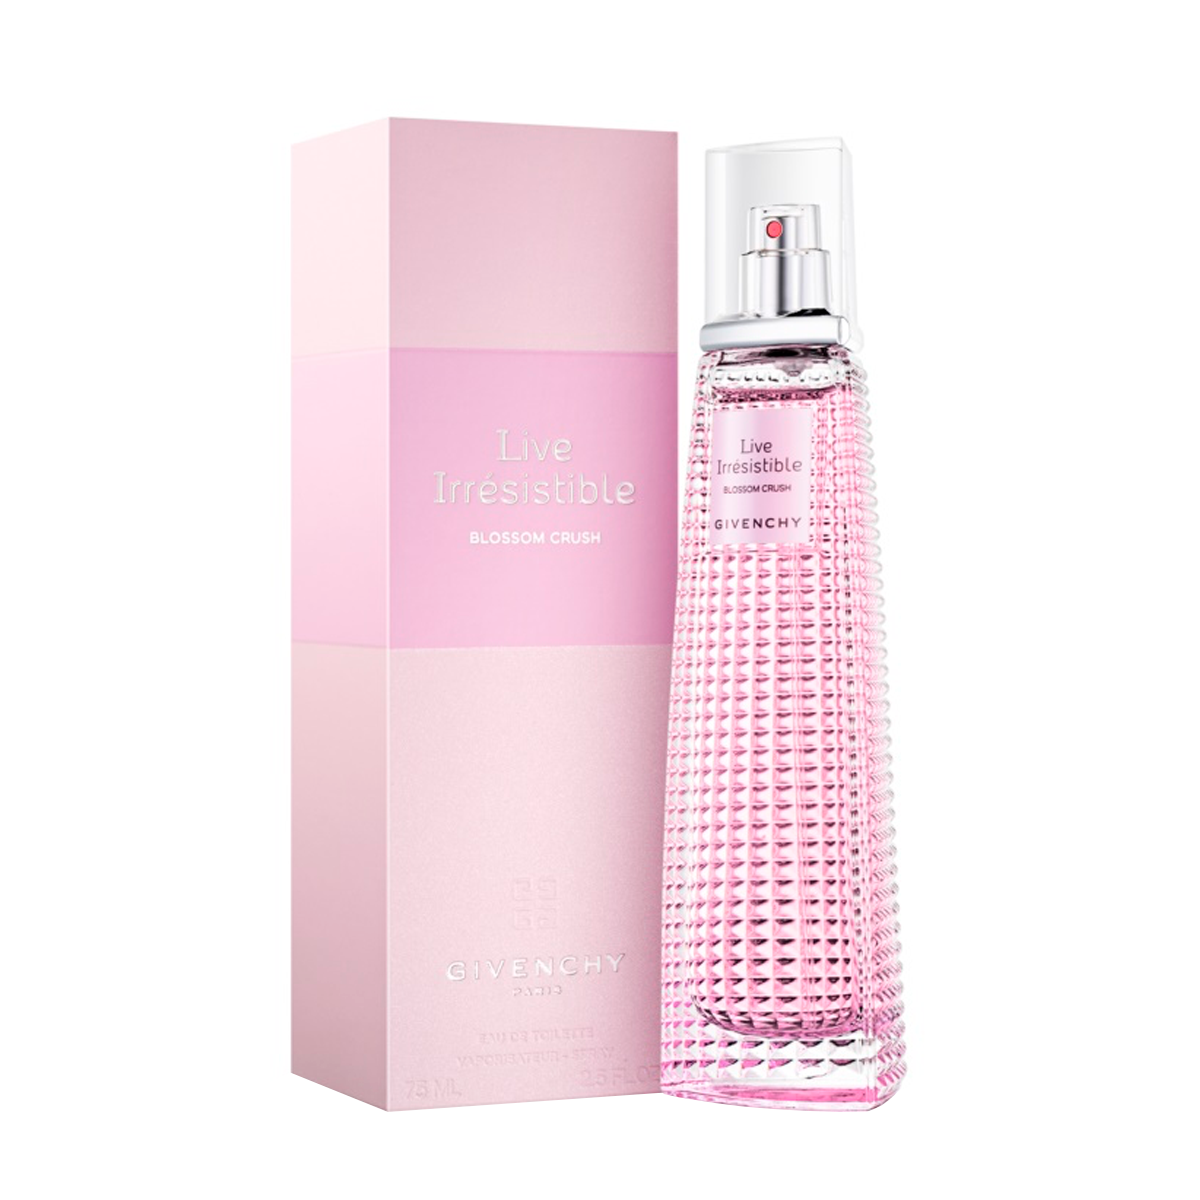 Givenchy Live Irresistible Blossom Crush EDT 75ml For Women